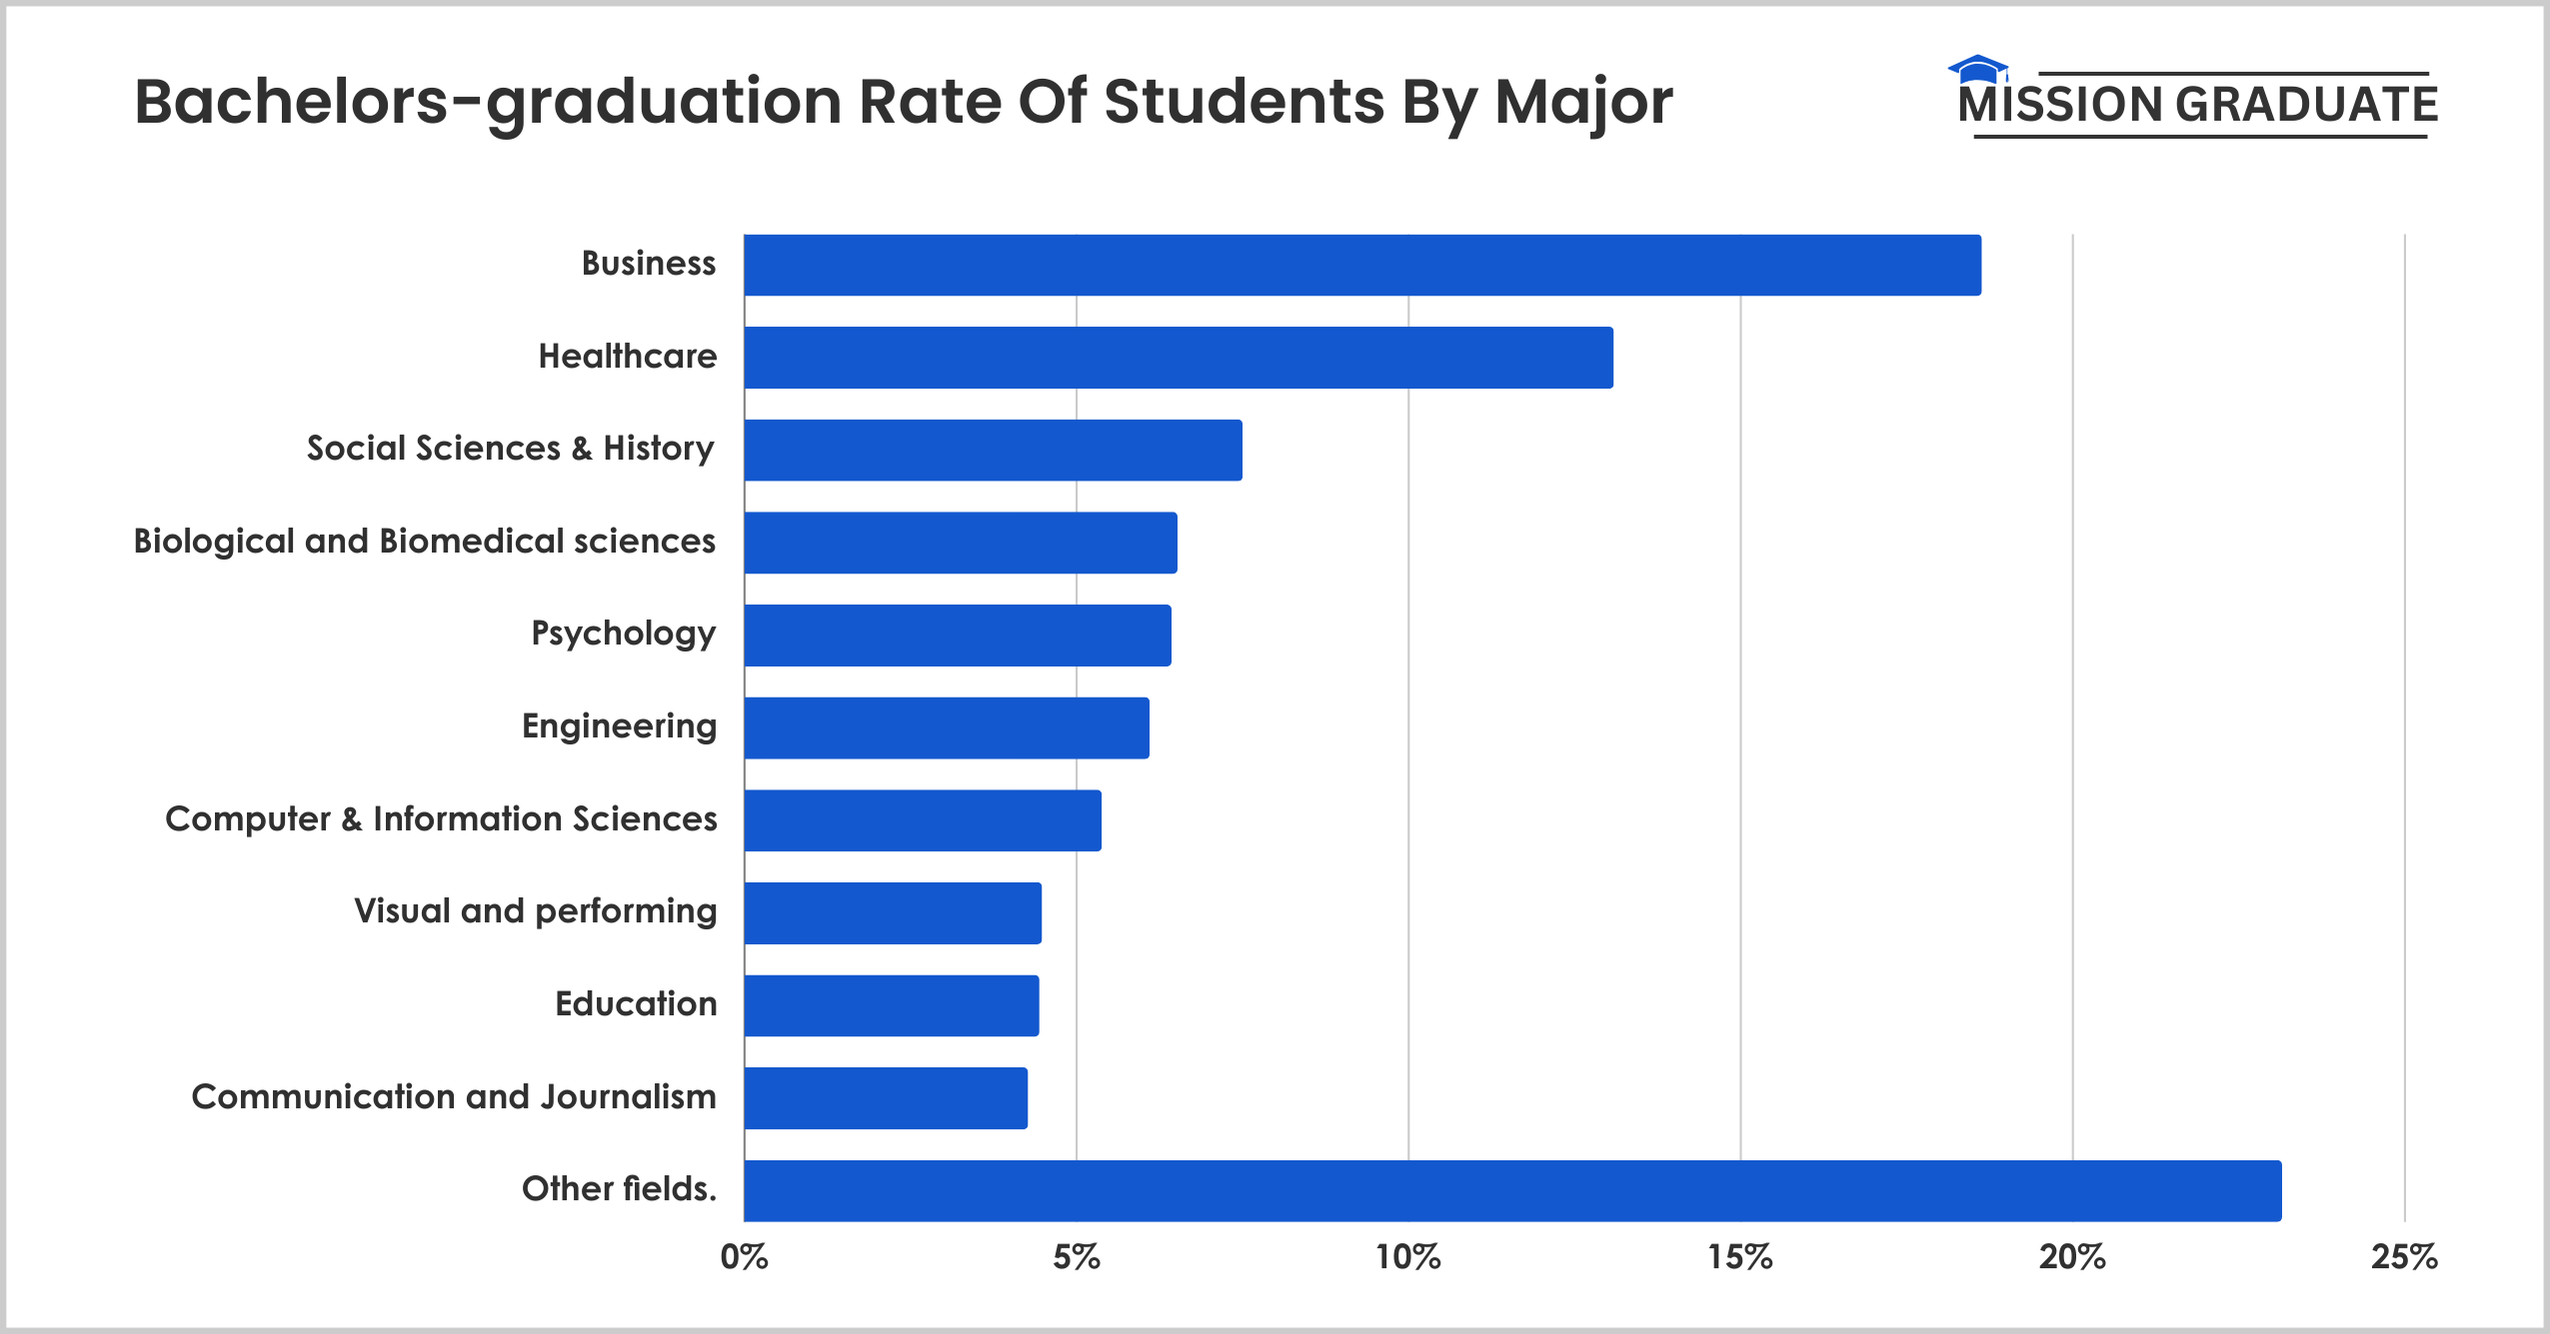 Bachelors-graduation Rate Of Students By Major